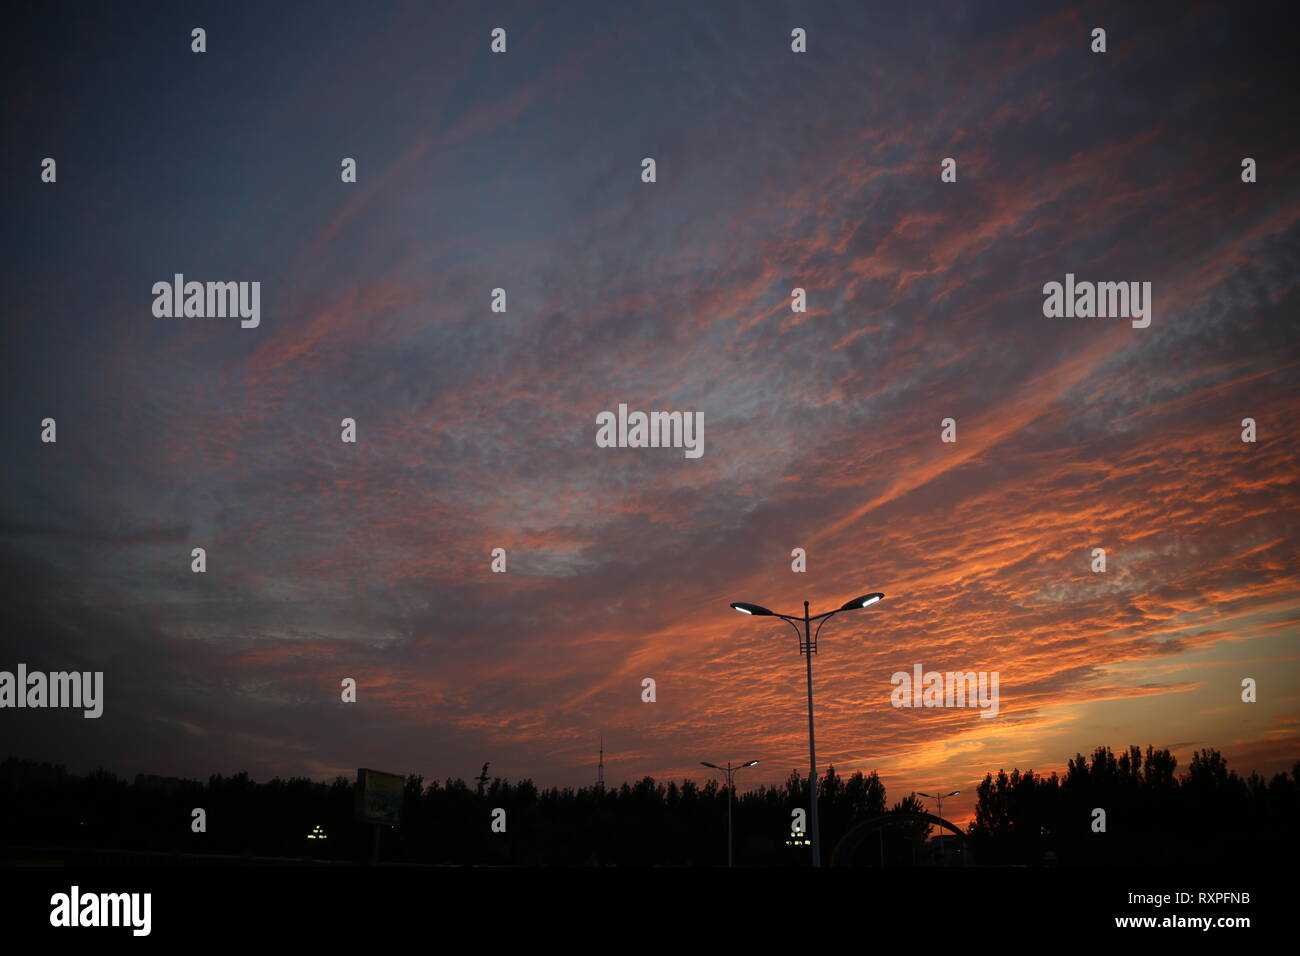 Sunset sky over the city of Liao Cheng, Shandong Province, China Stock Photo